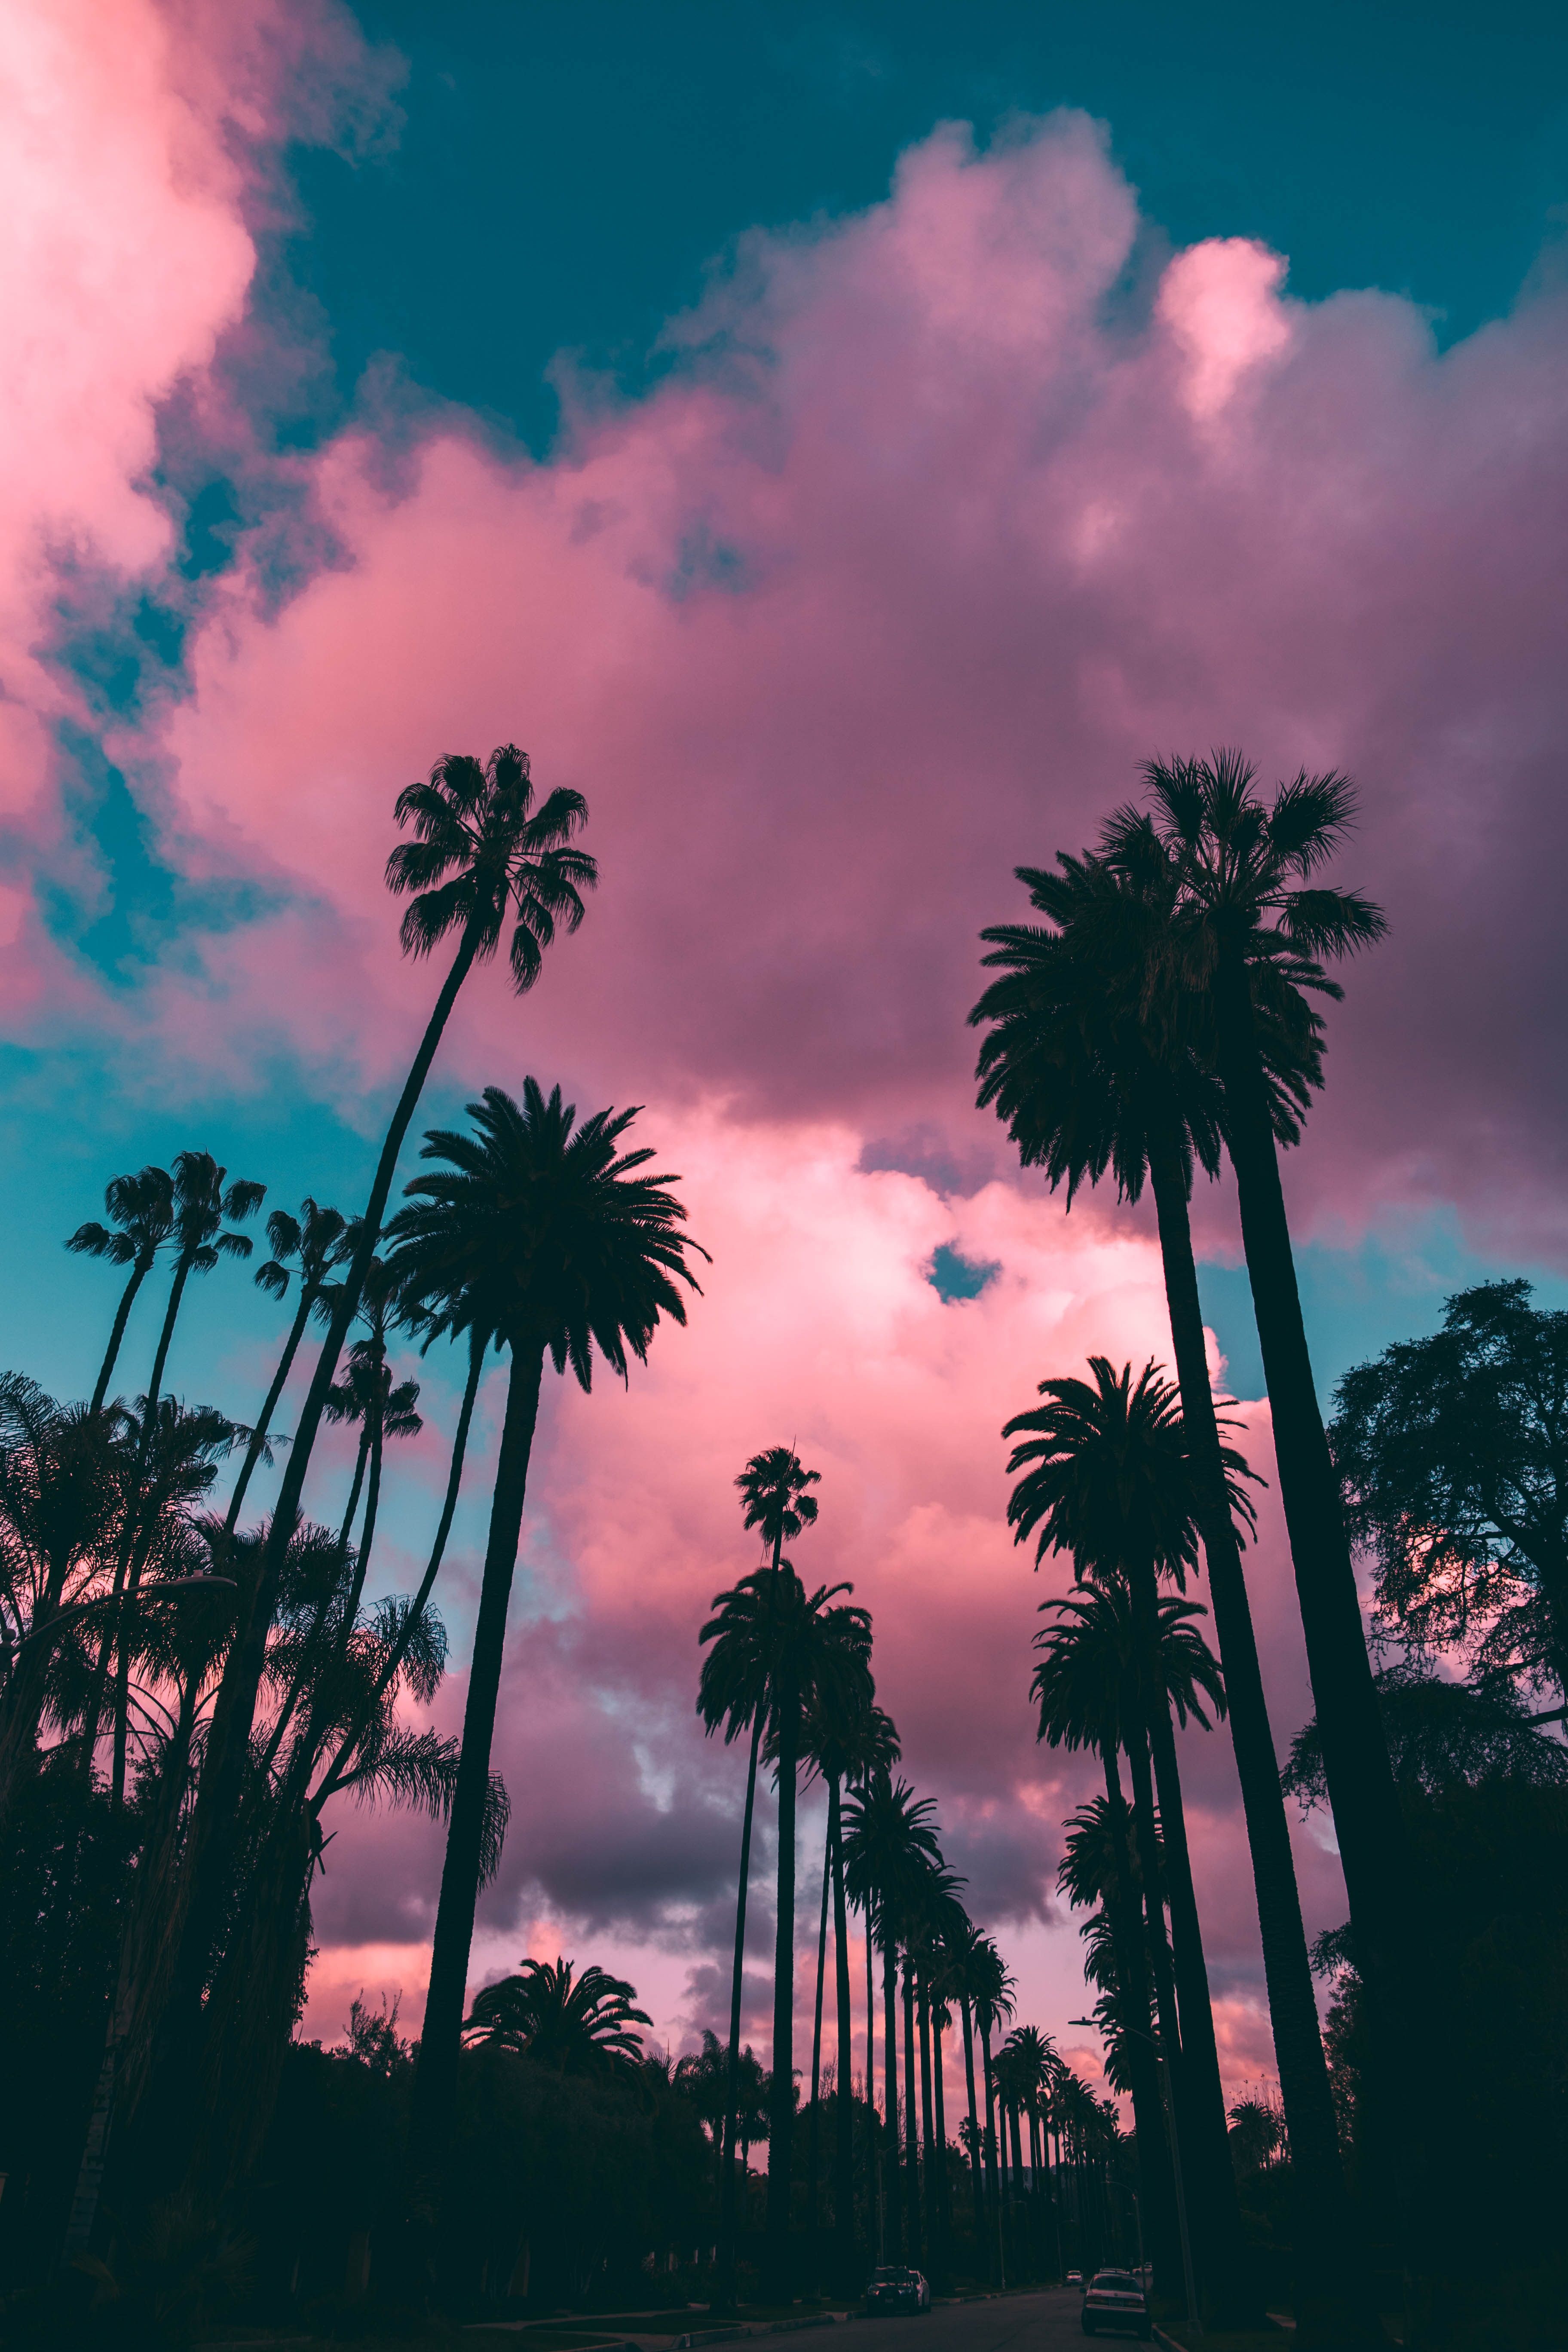 A row of palm trees with a pink and blue sky in the background. - Palm tree